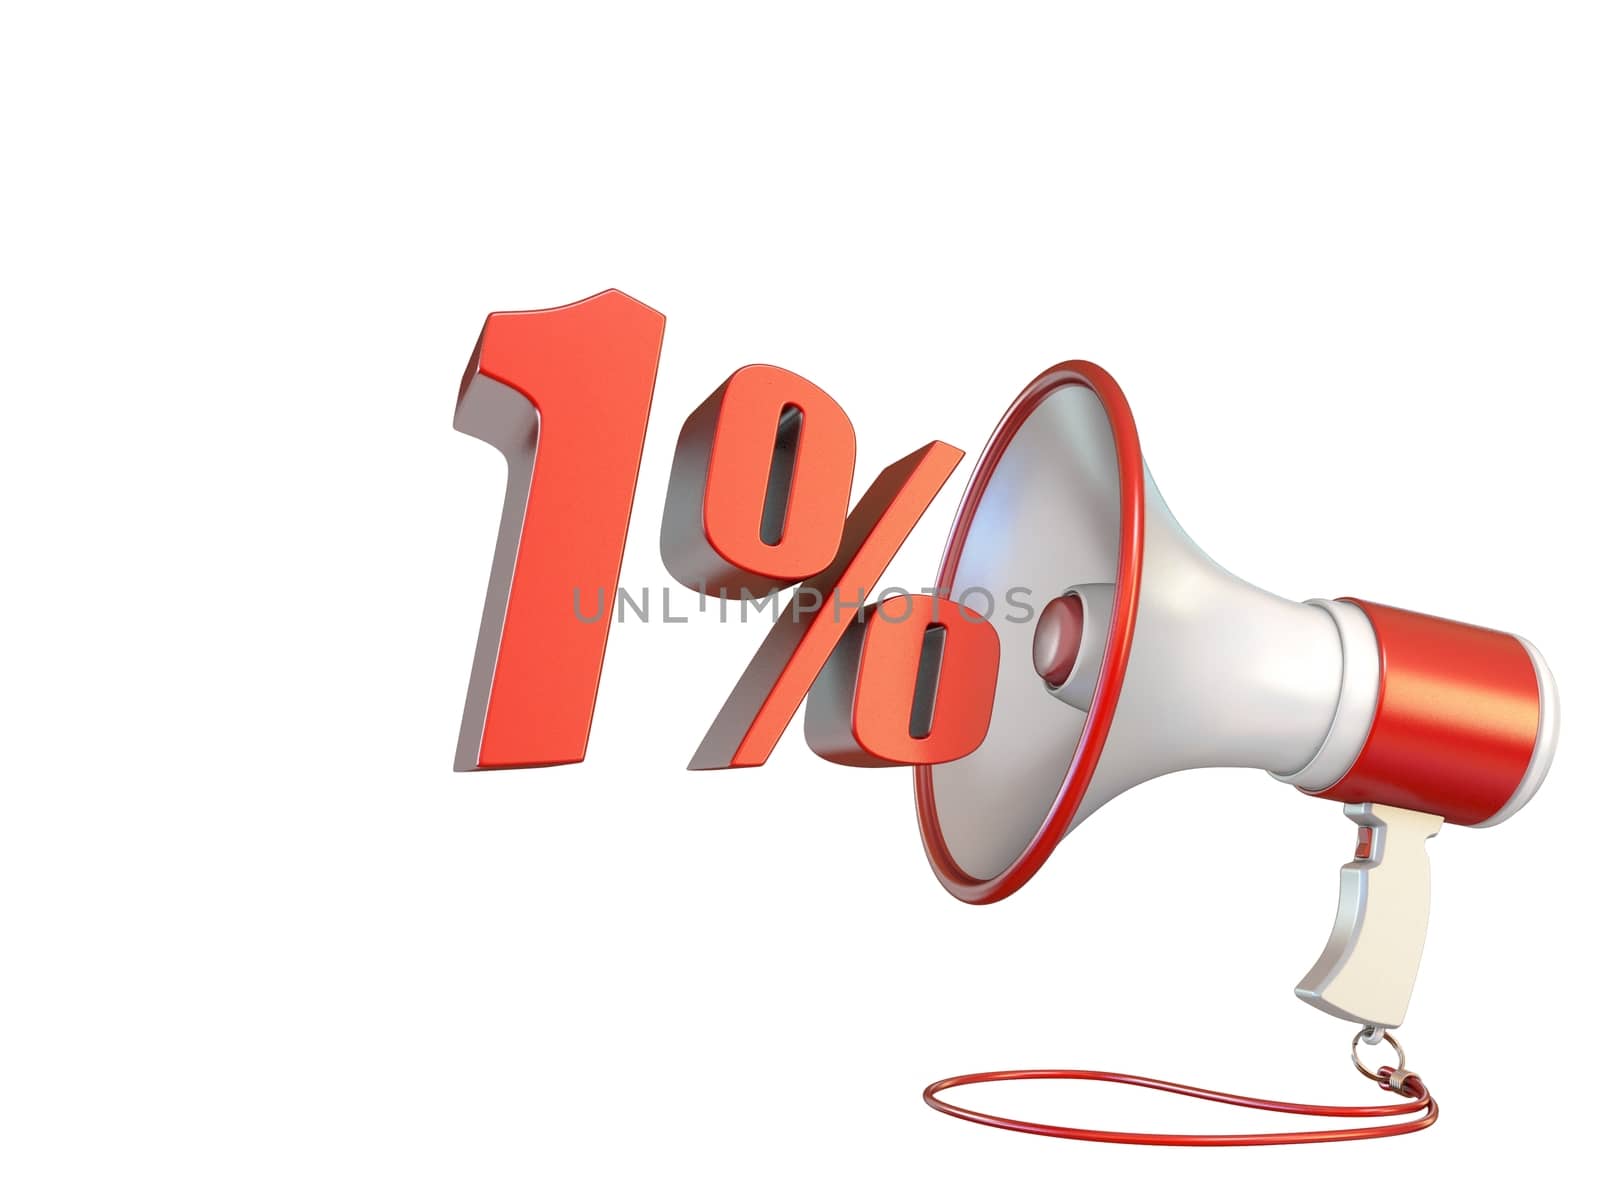 1 percent sign and megaphone 3D rendering illustration isolated on white background